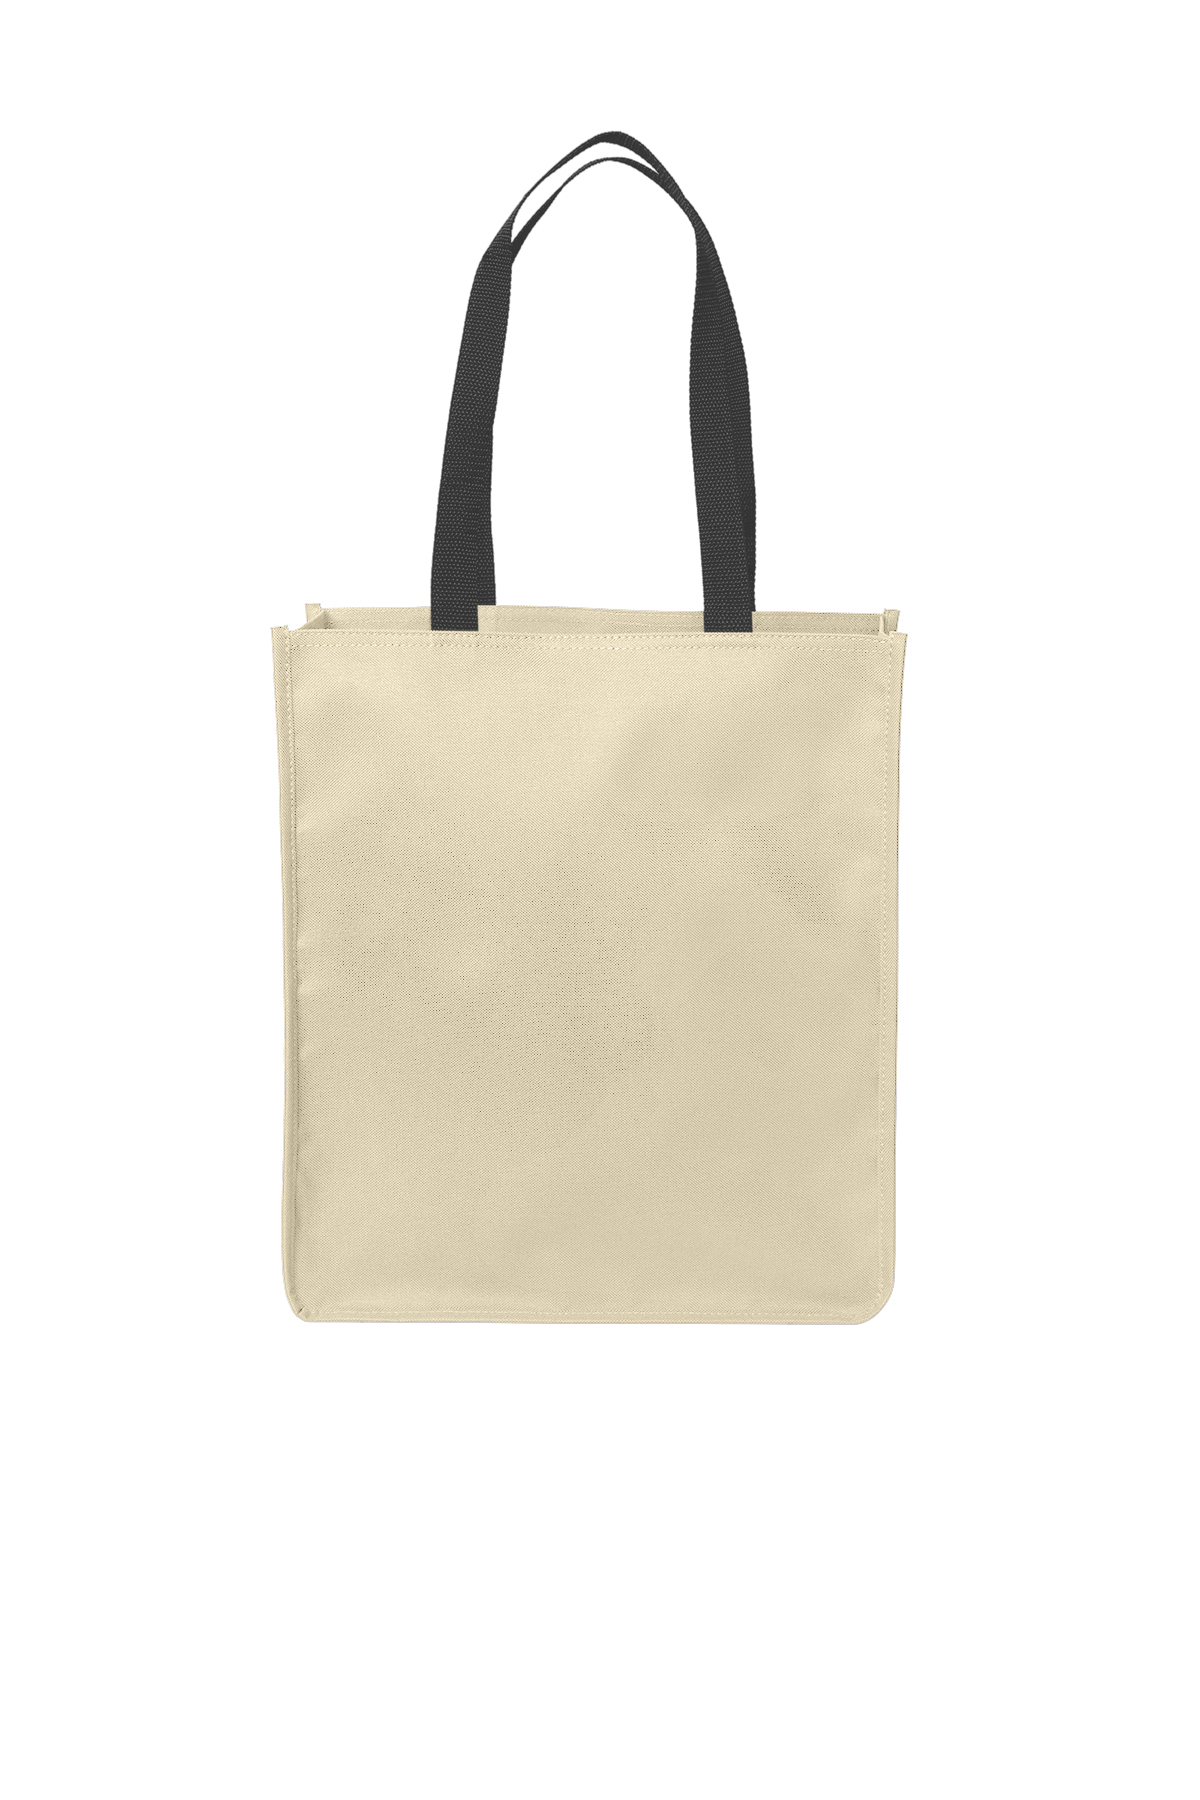 Port Authority Upright Essential Tote | Product | Port Authority